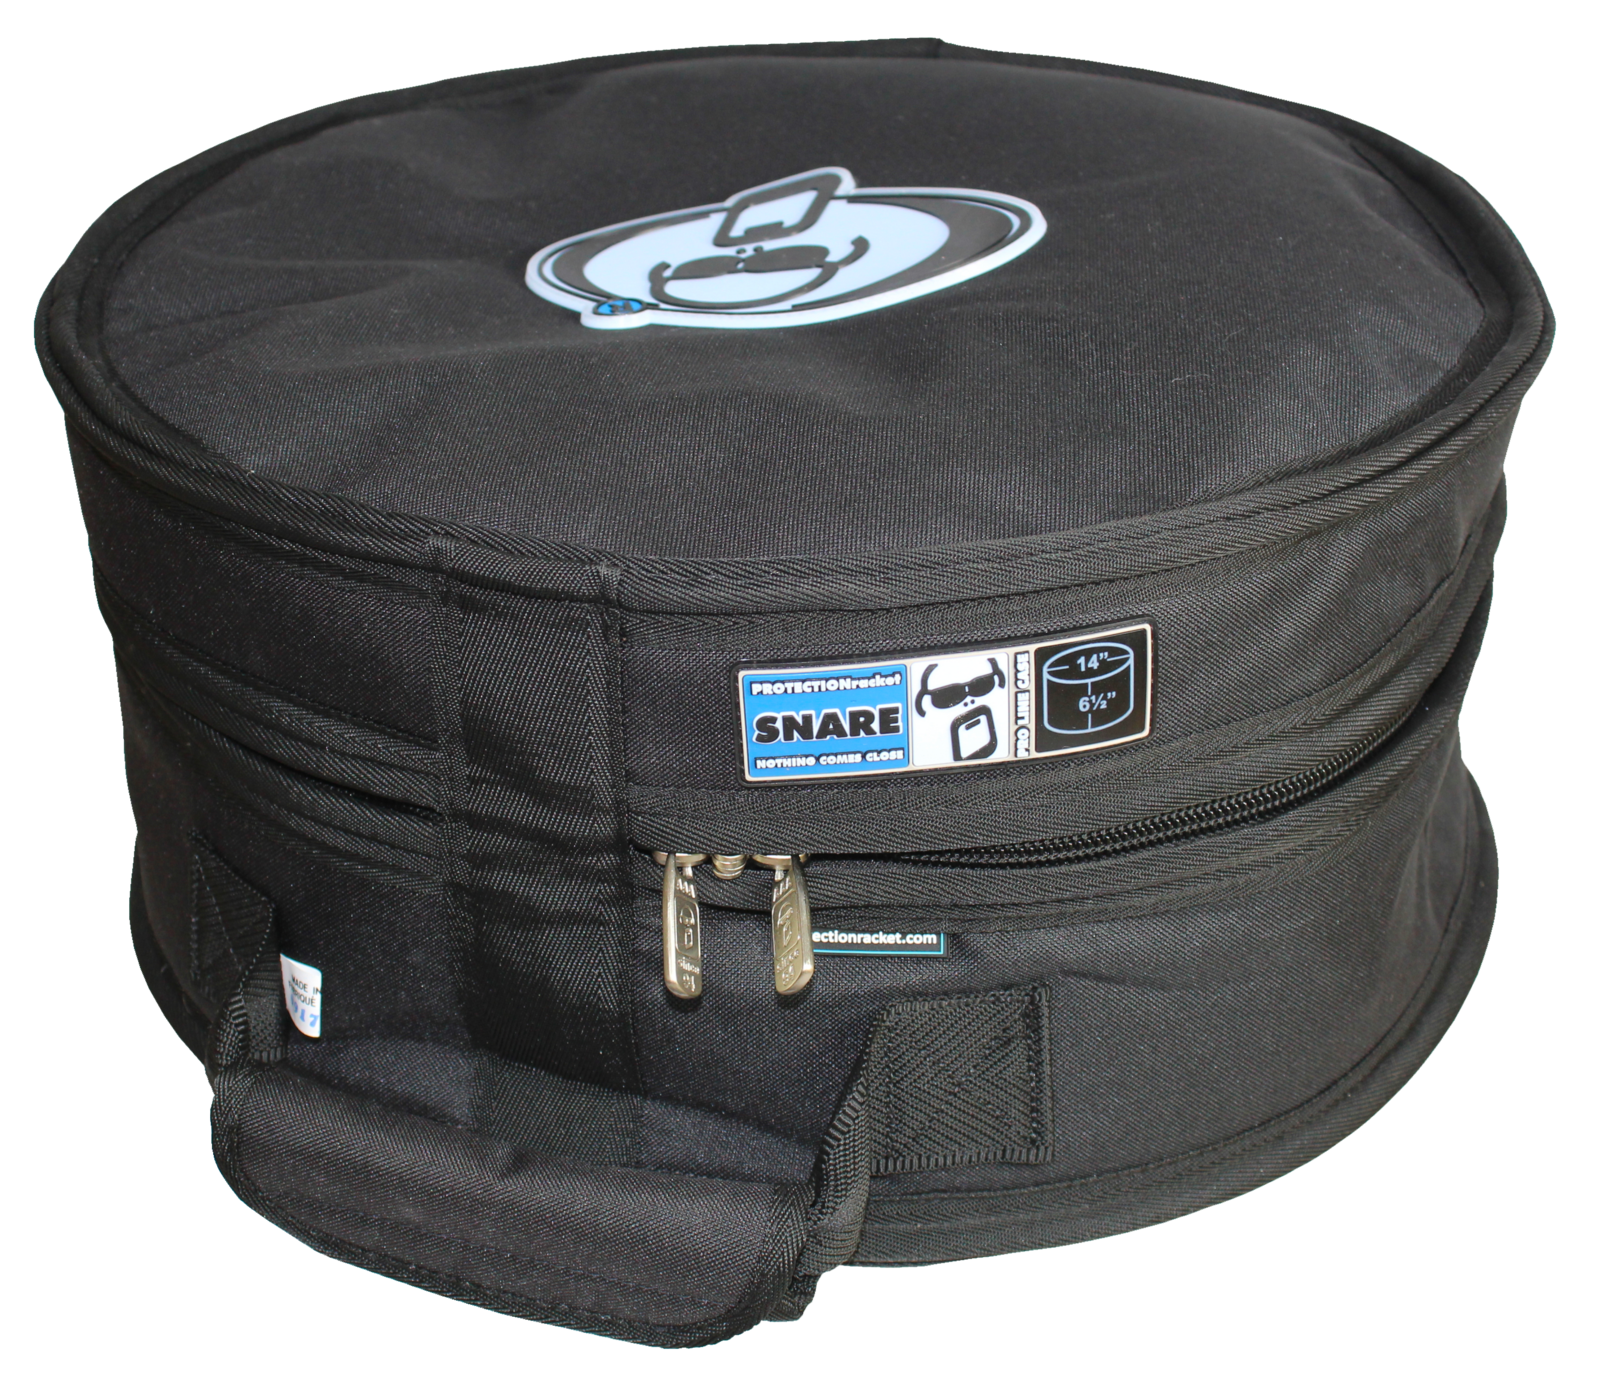 Protection Racket 3011 14x5.5" Snare Bag